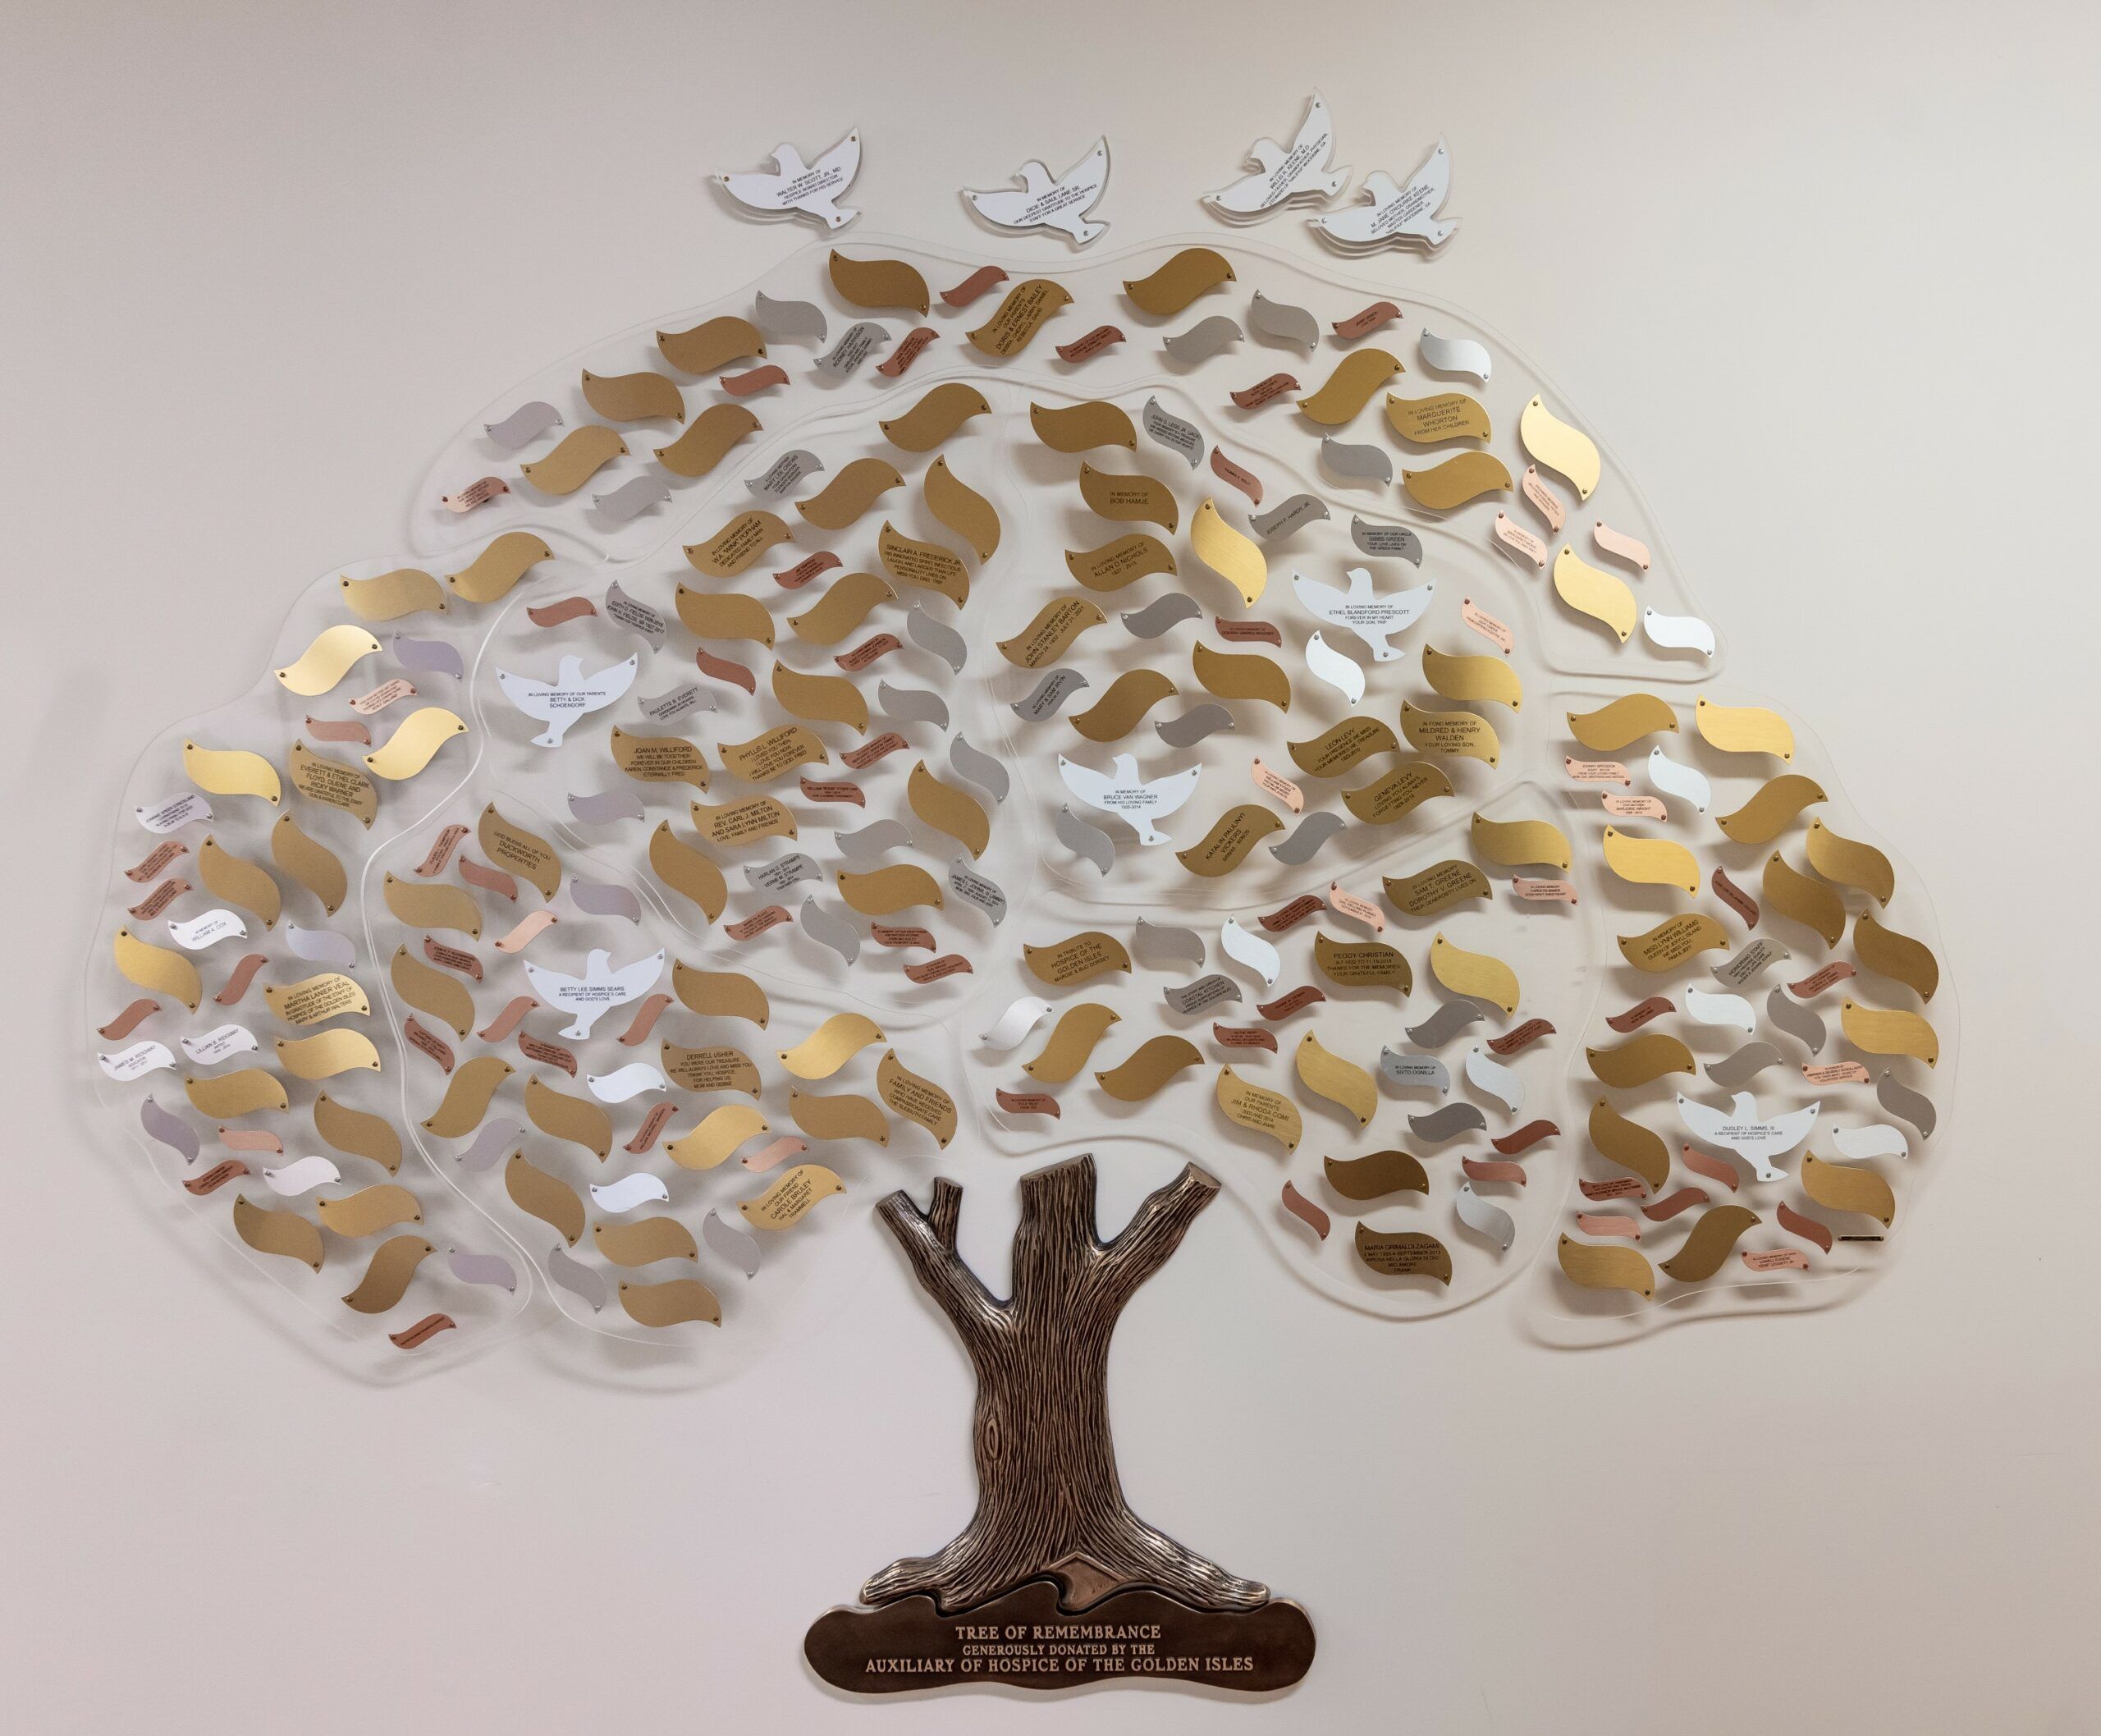 Hospice of the Golden Isles donation tree